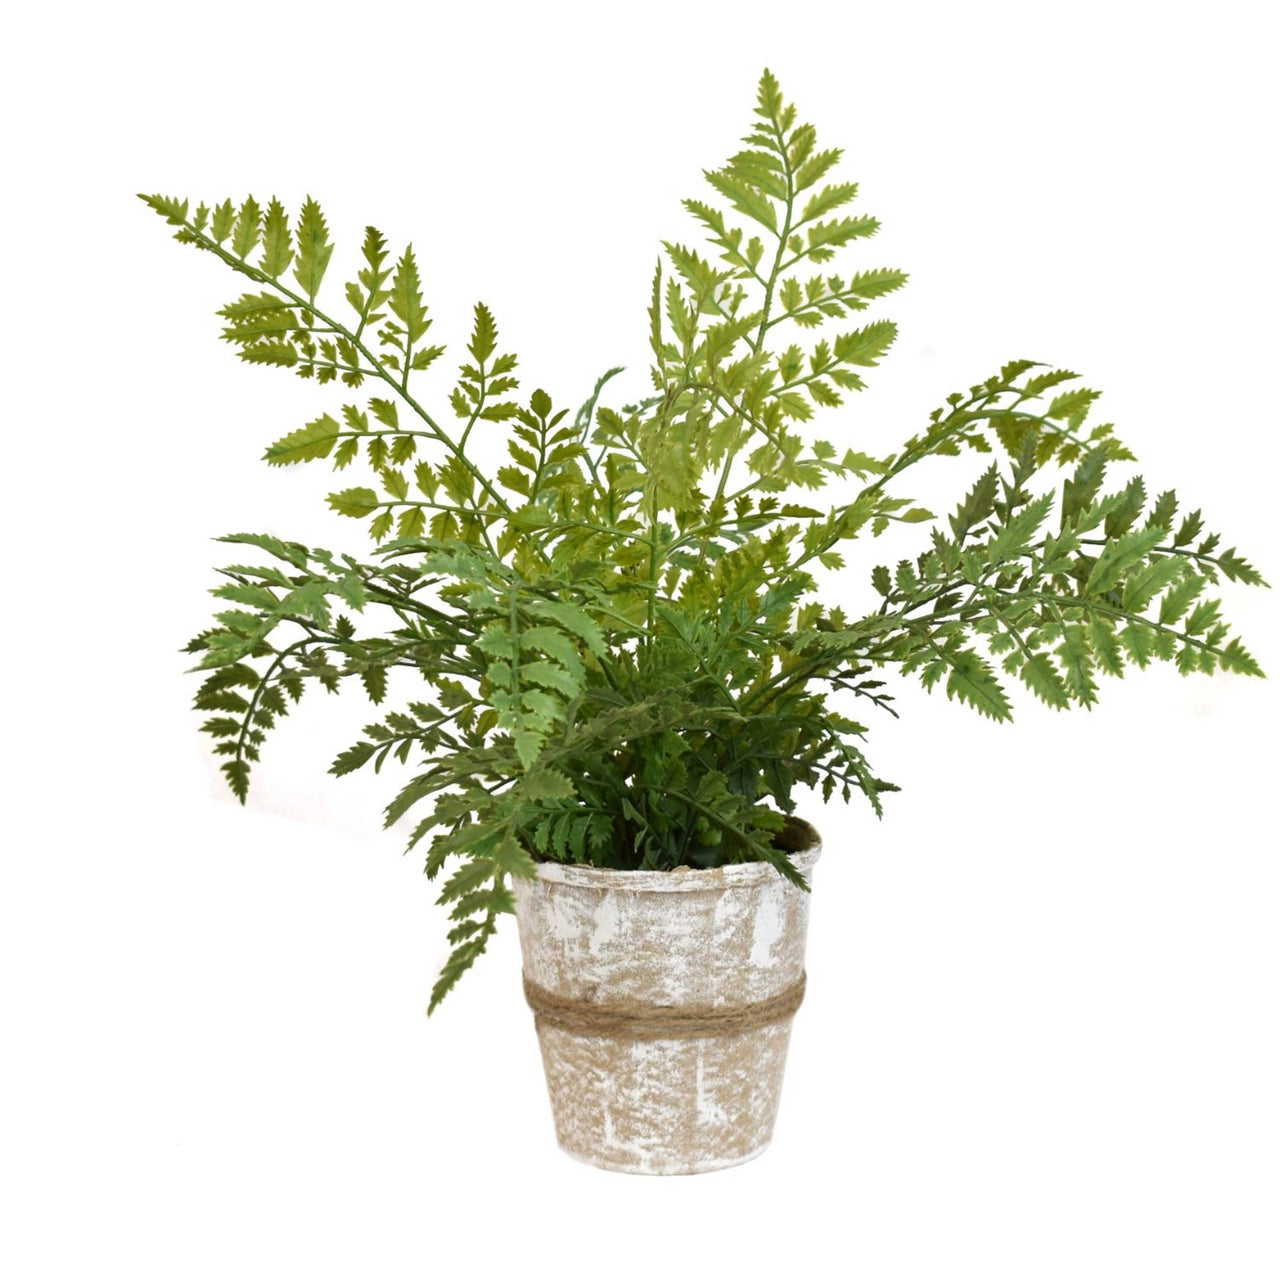 15” River Fern Plant in Handcrafted Paper Pot - Rubbish Restyled